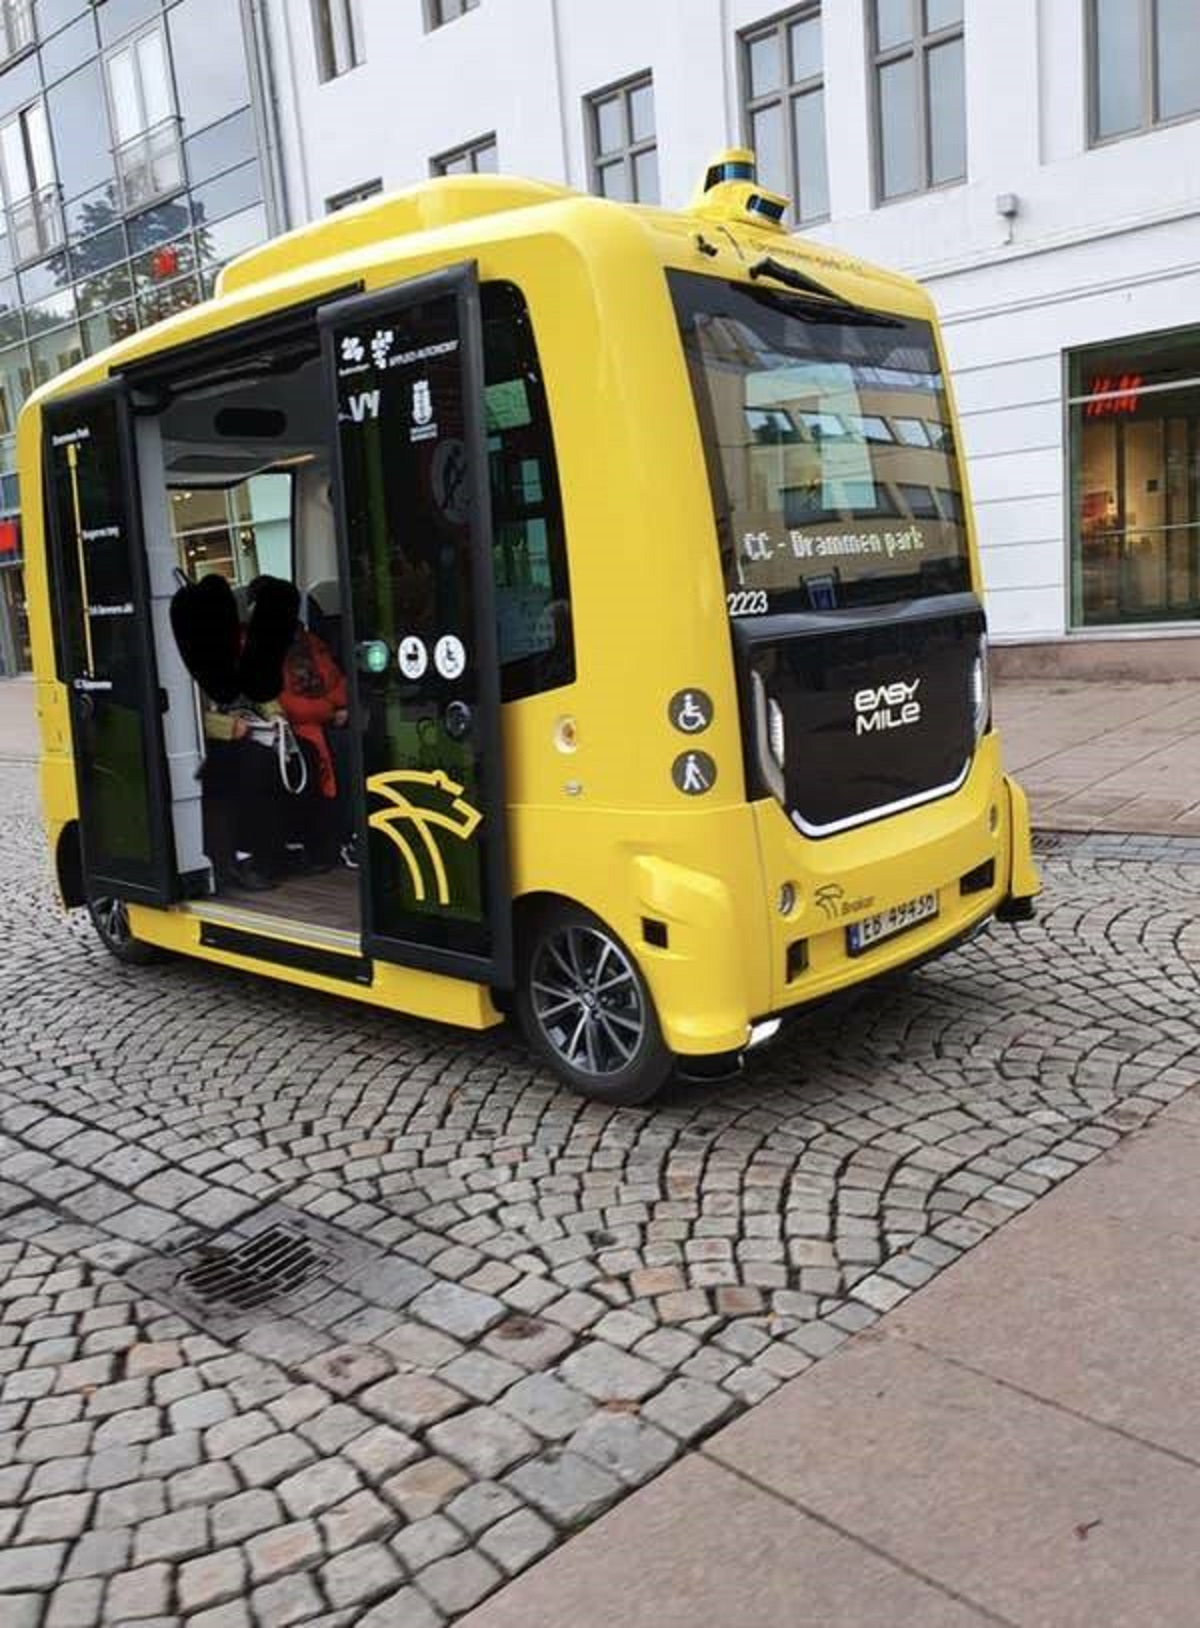 Did you know they have SELF-DRIVING BUSES in Norway???